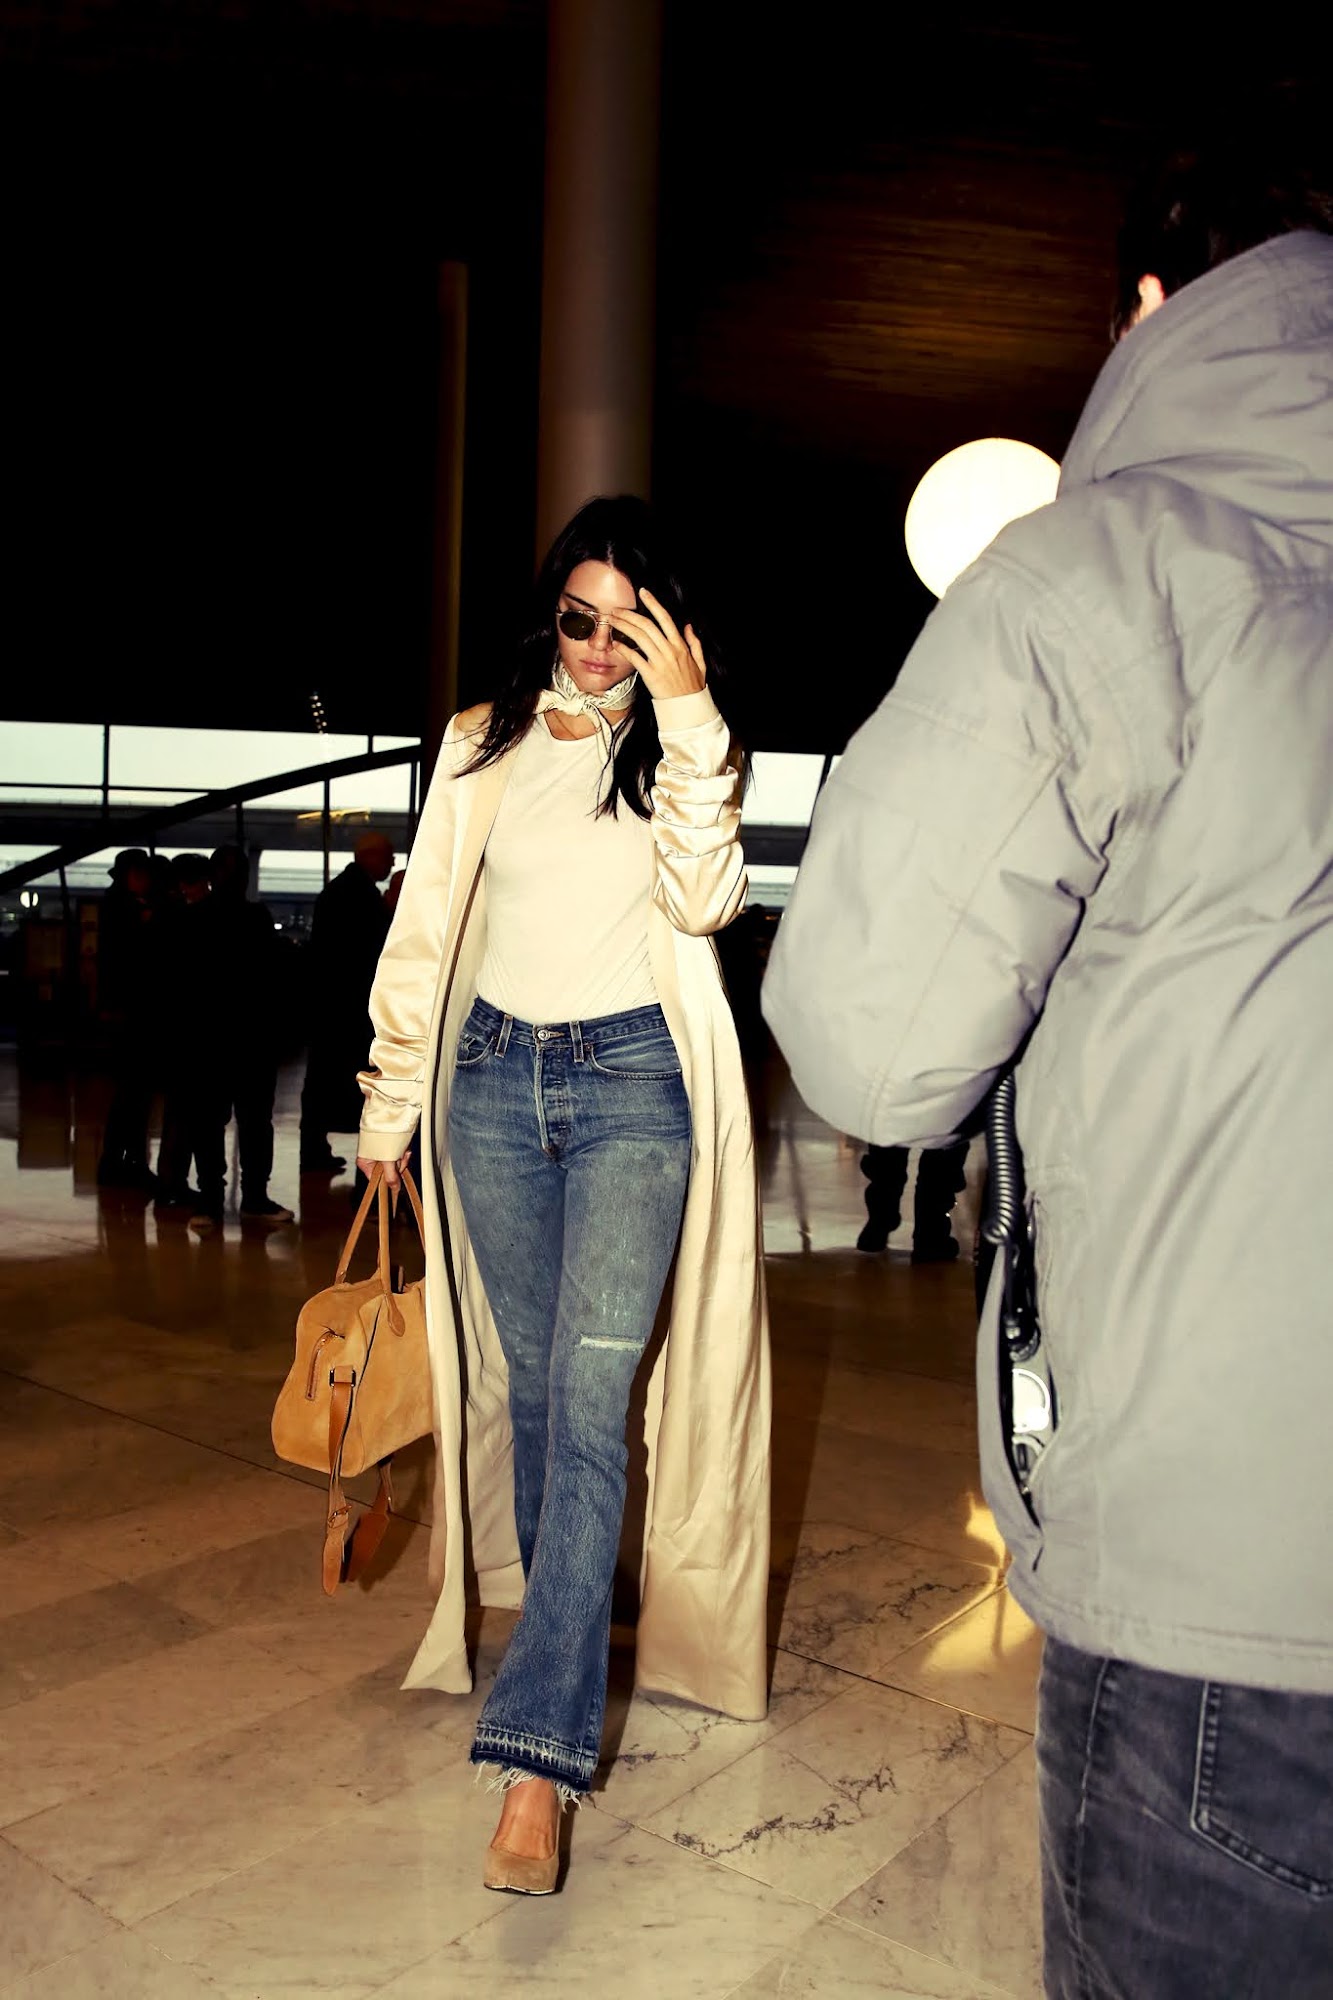 Jan 23rd 2016 At Charles de Gaulle airport in Paris France | Kendall ...